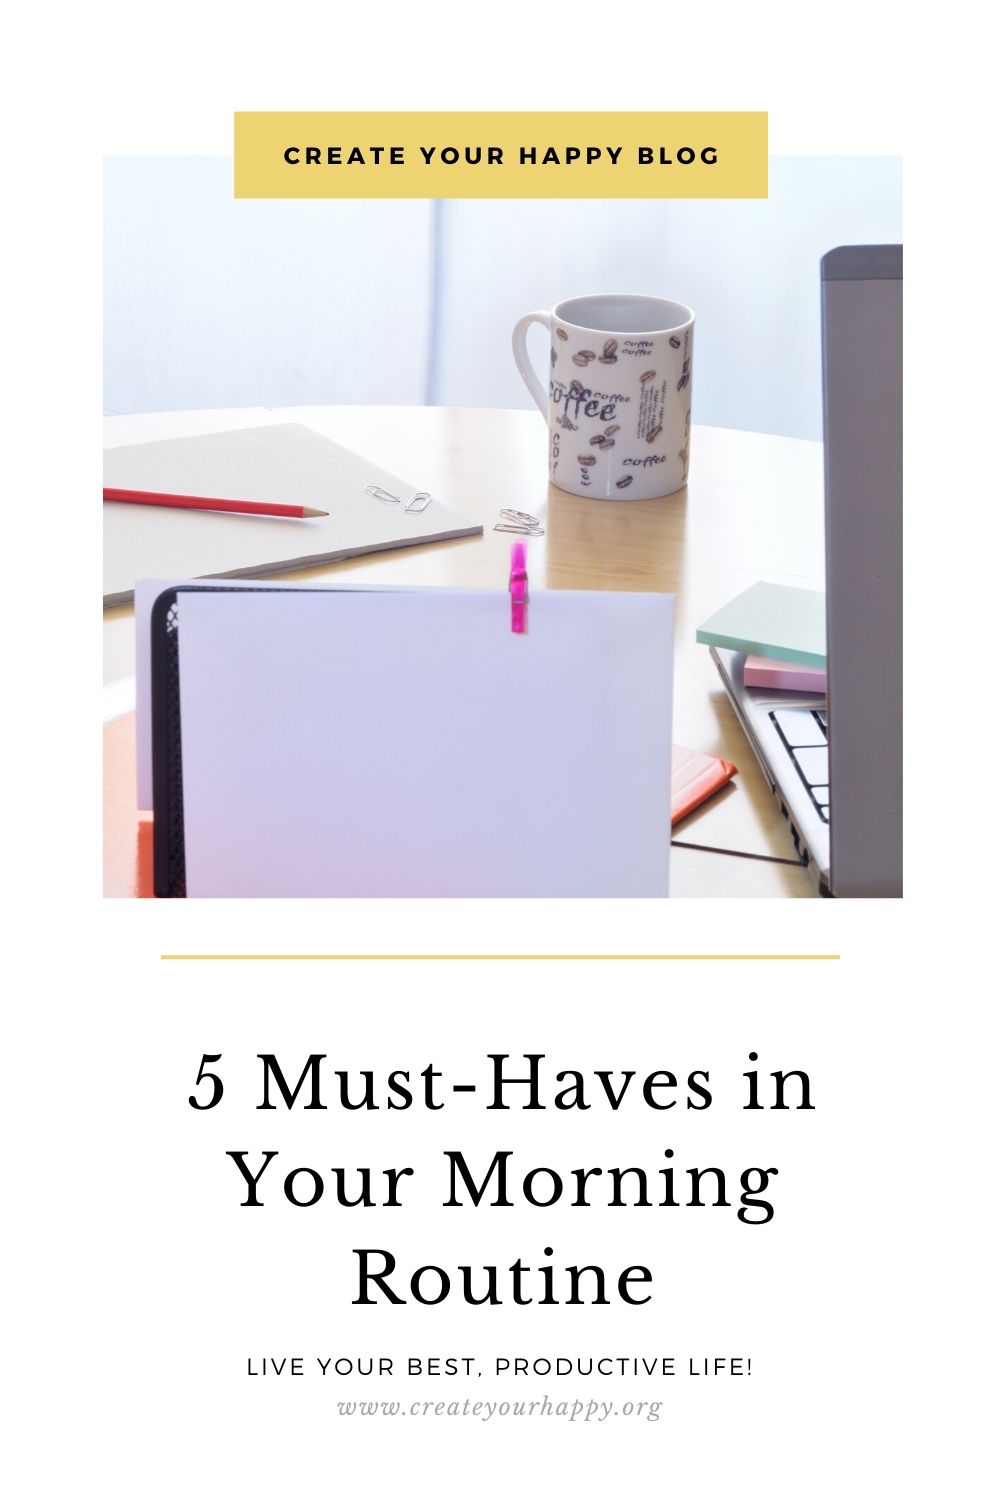 5 Must-Haves in Your Morning Routine